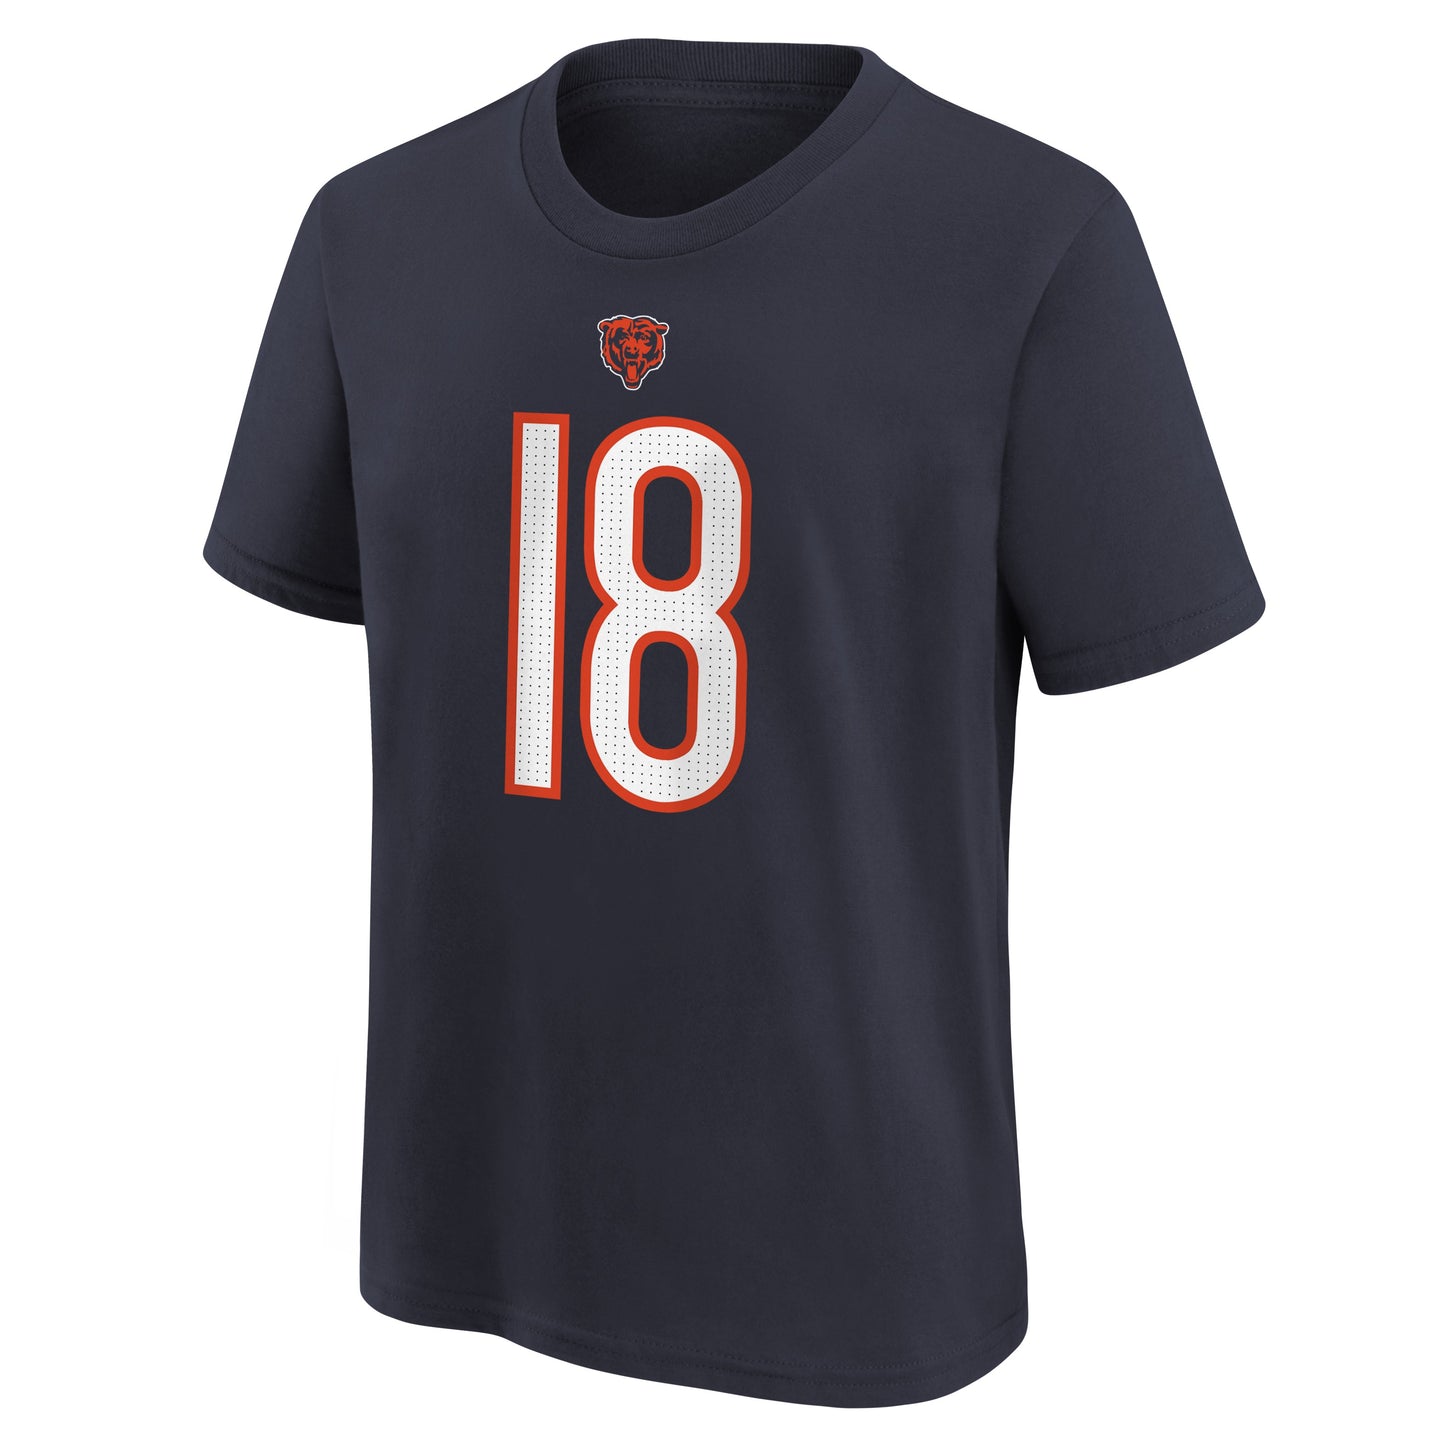 Youth Caleb Williams Chicago Bears Nike Navy FUSE Name & Number T-Shirt